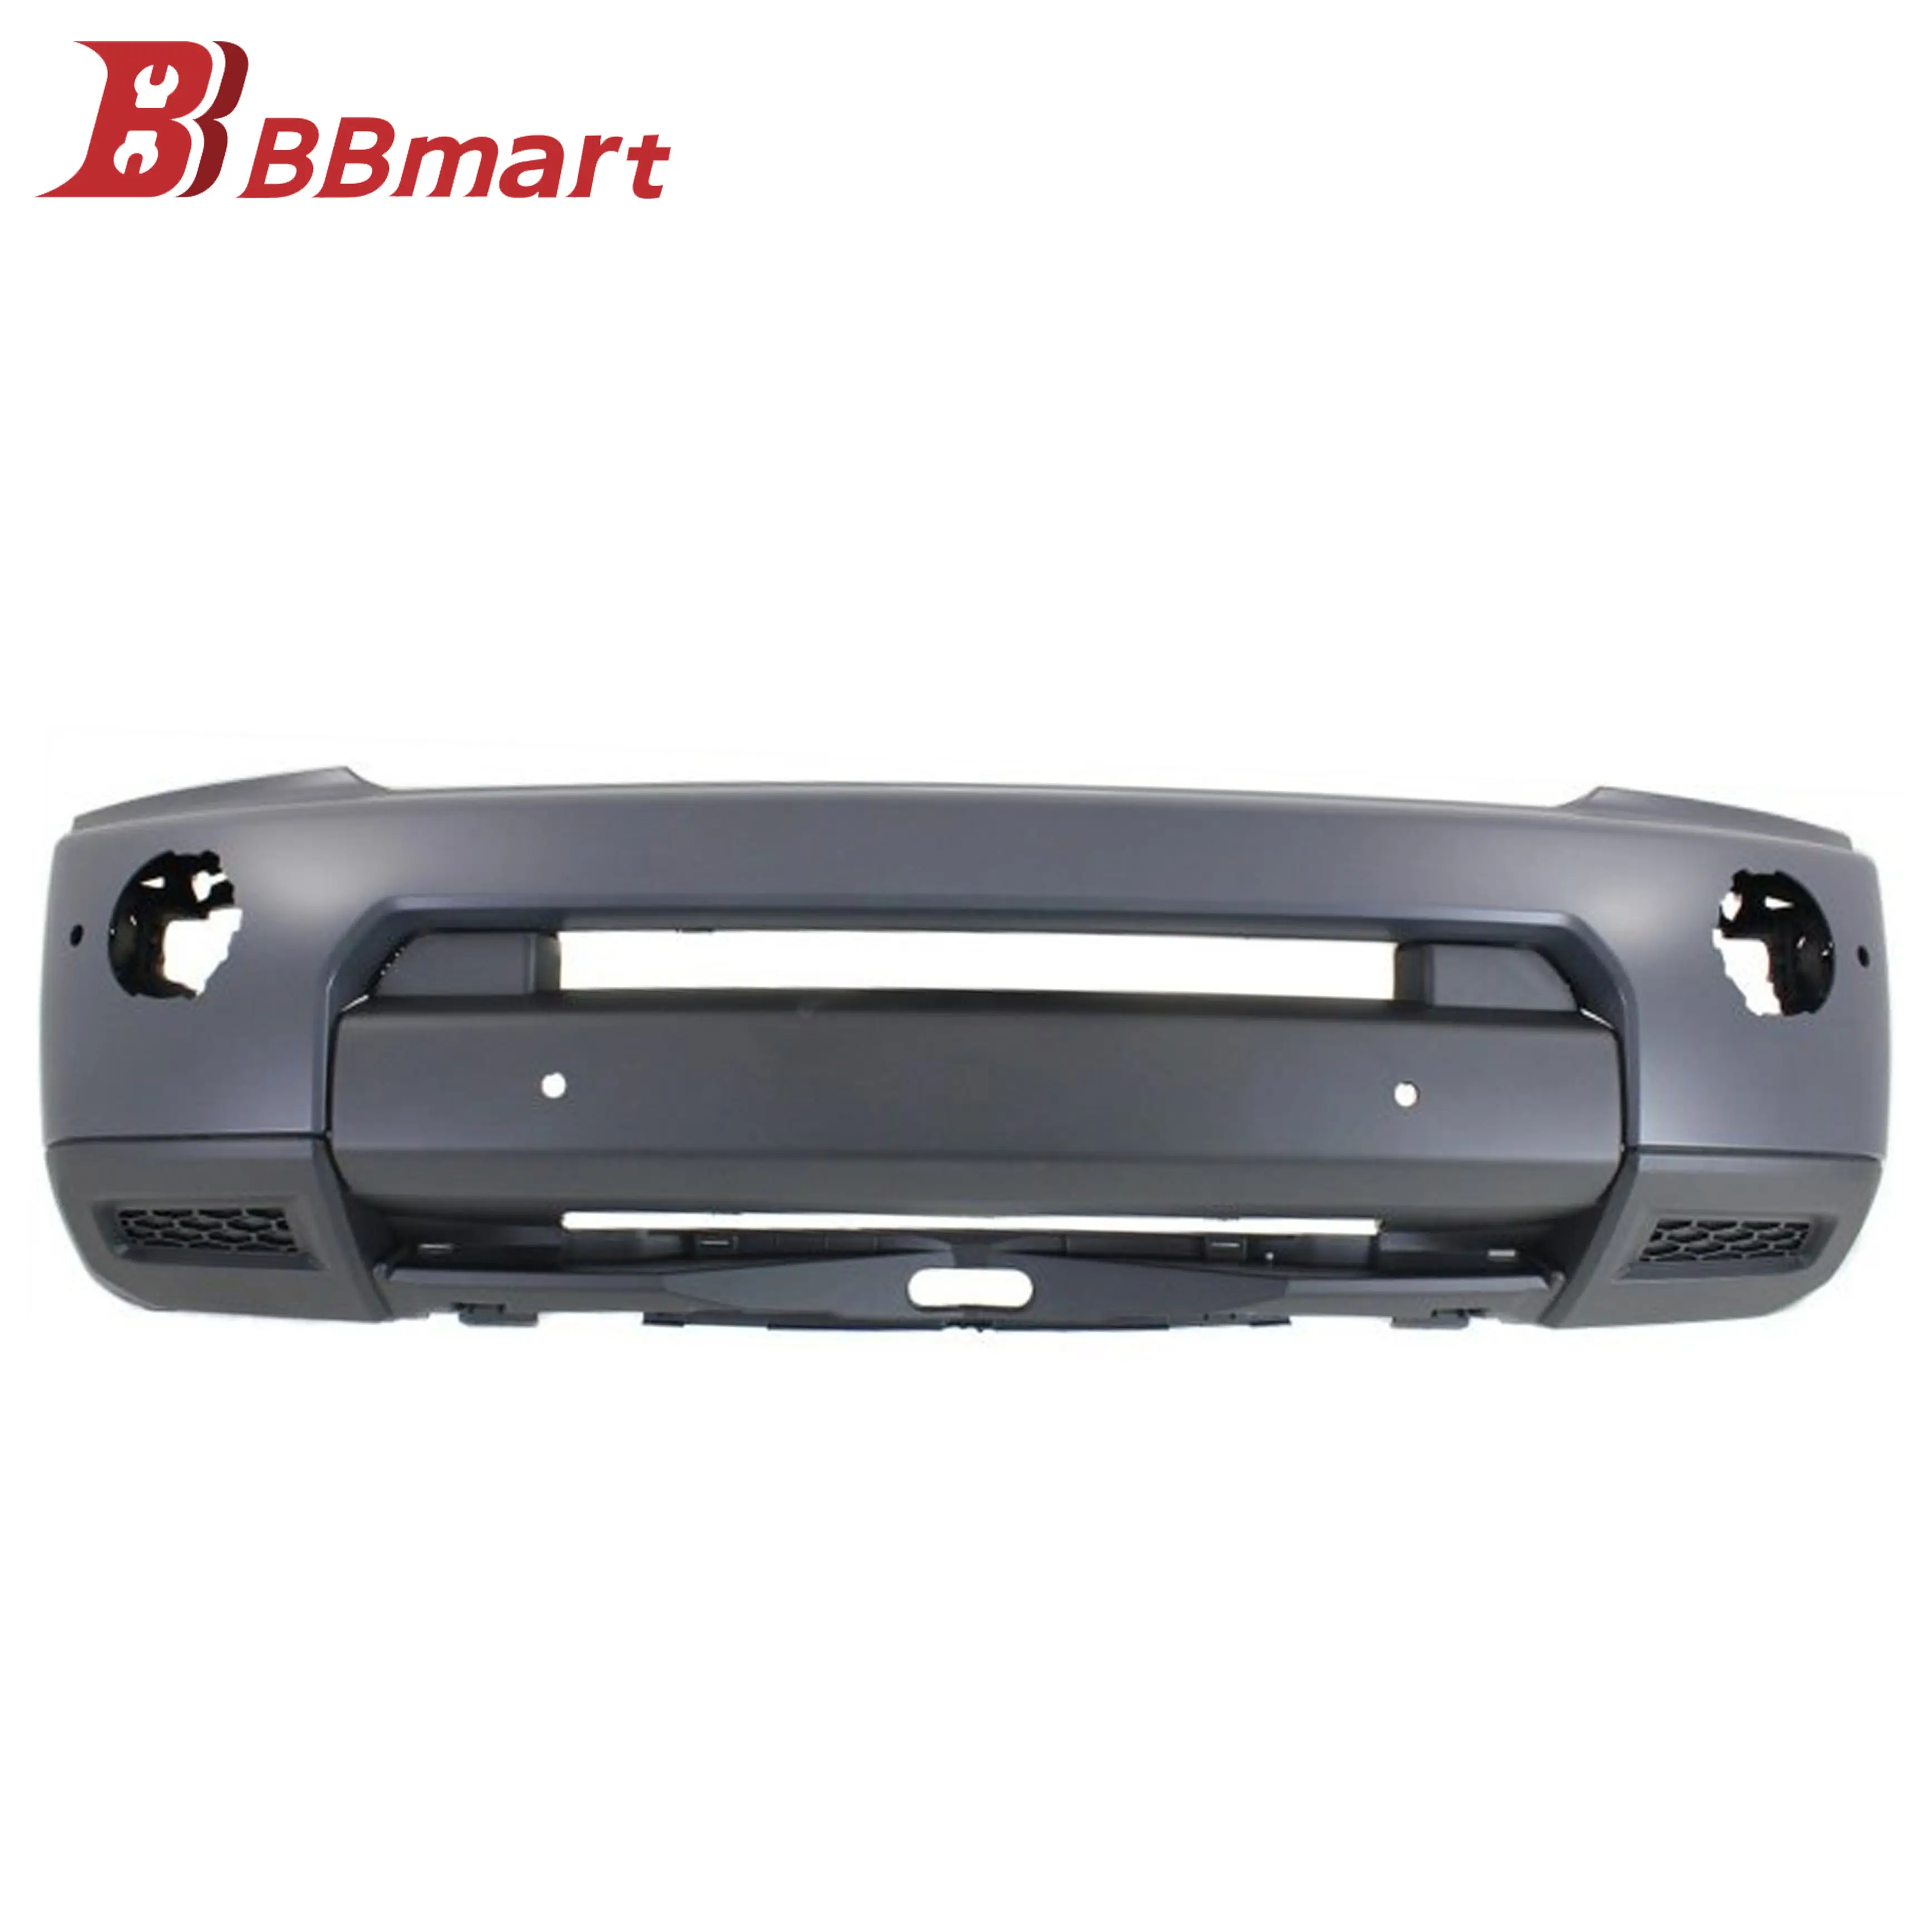 BBmart Auto Parts Front Car Bumper For LAND ROVER Discovery 4 OE LR013896